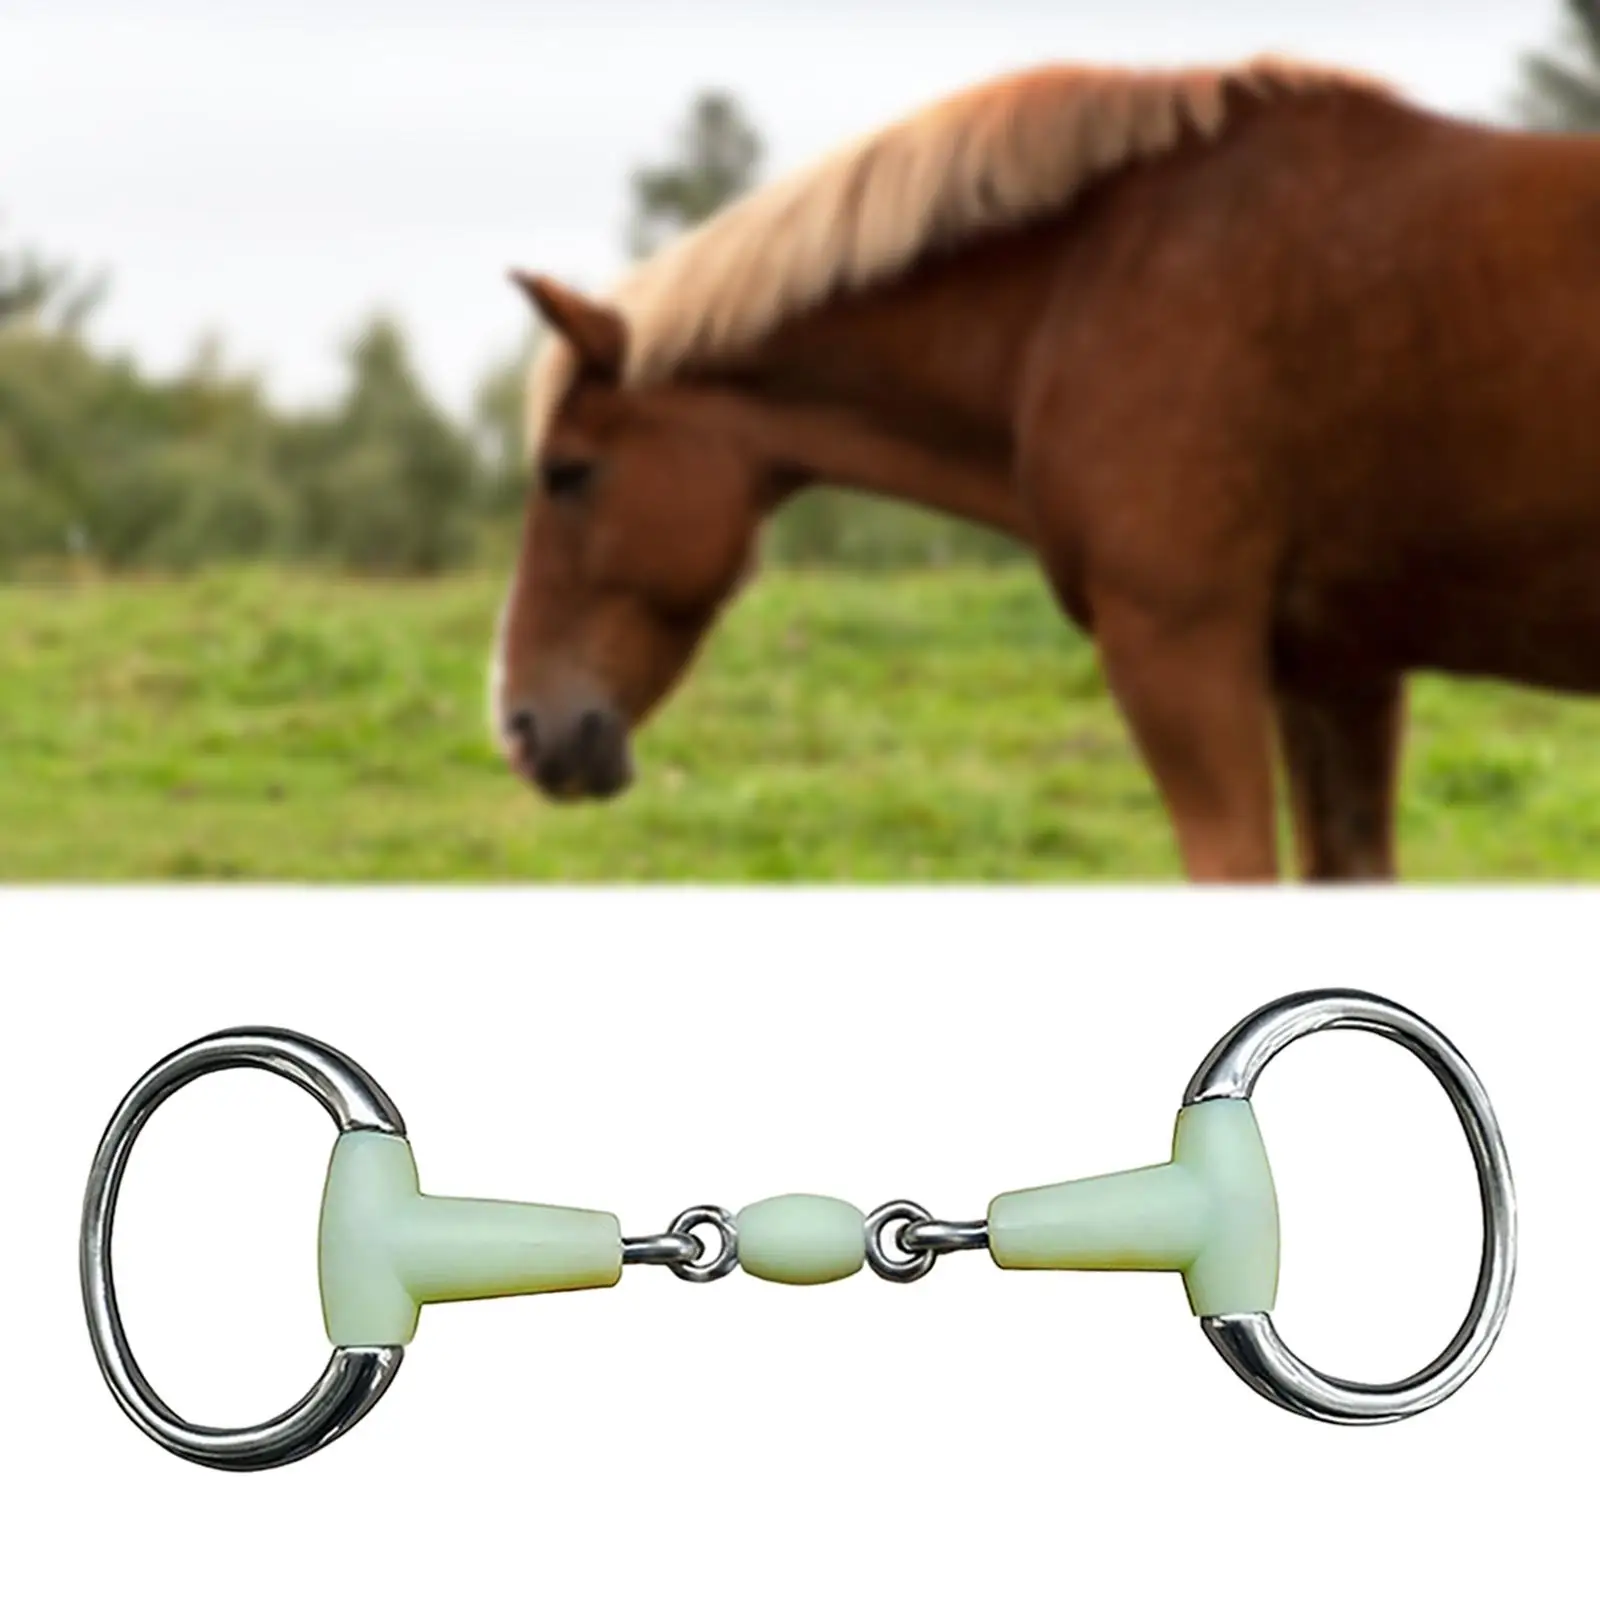 Horse Bit Mouth Wear Resistant Horse Training Snaffle Tool Stainless Steel for Horse Riding Equipment Draft Horses Mules